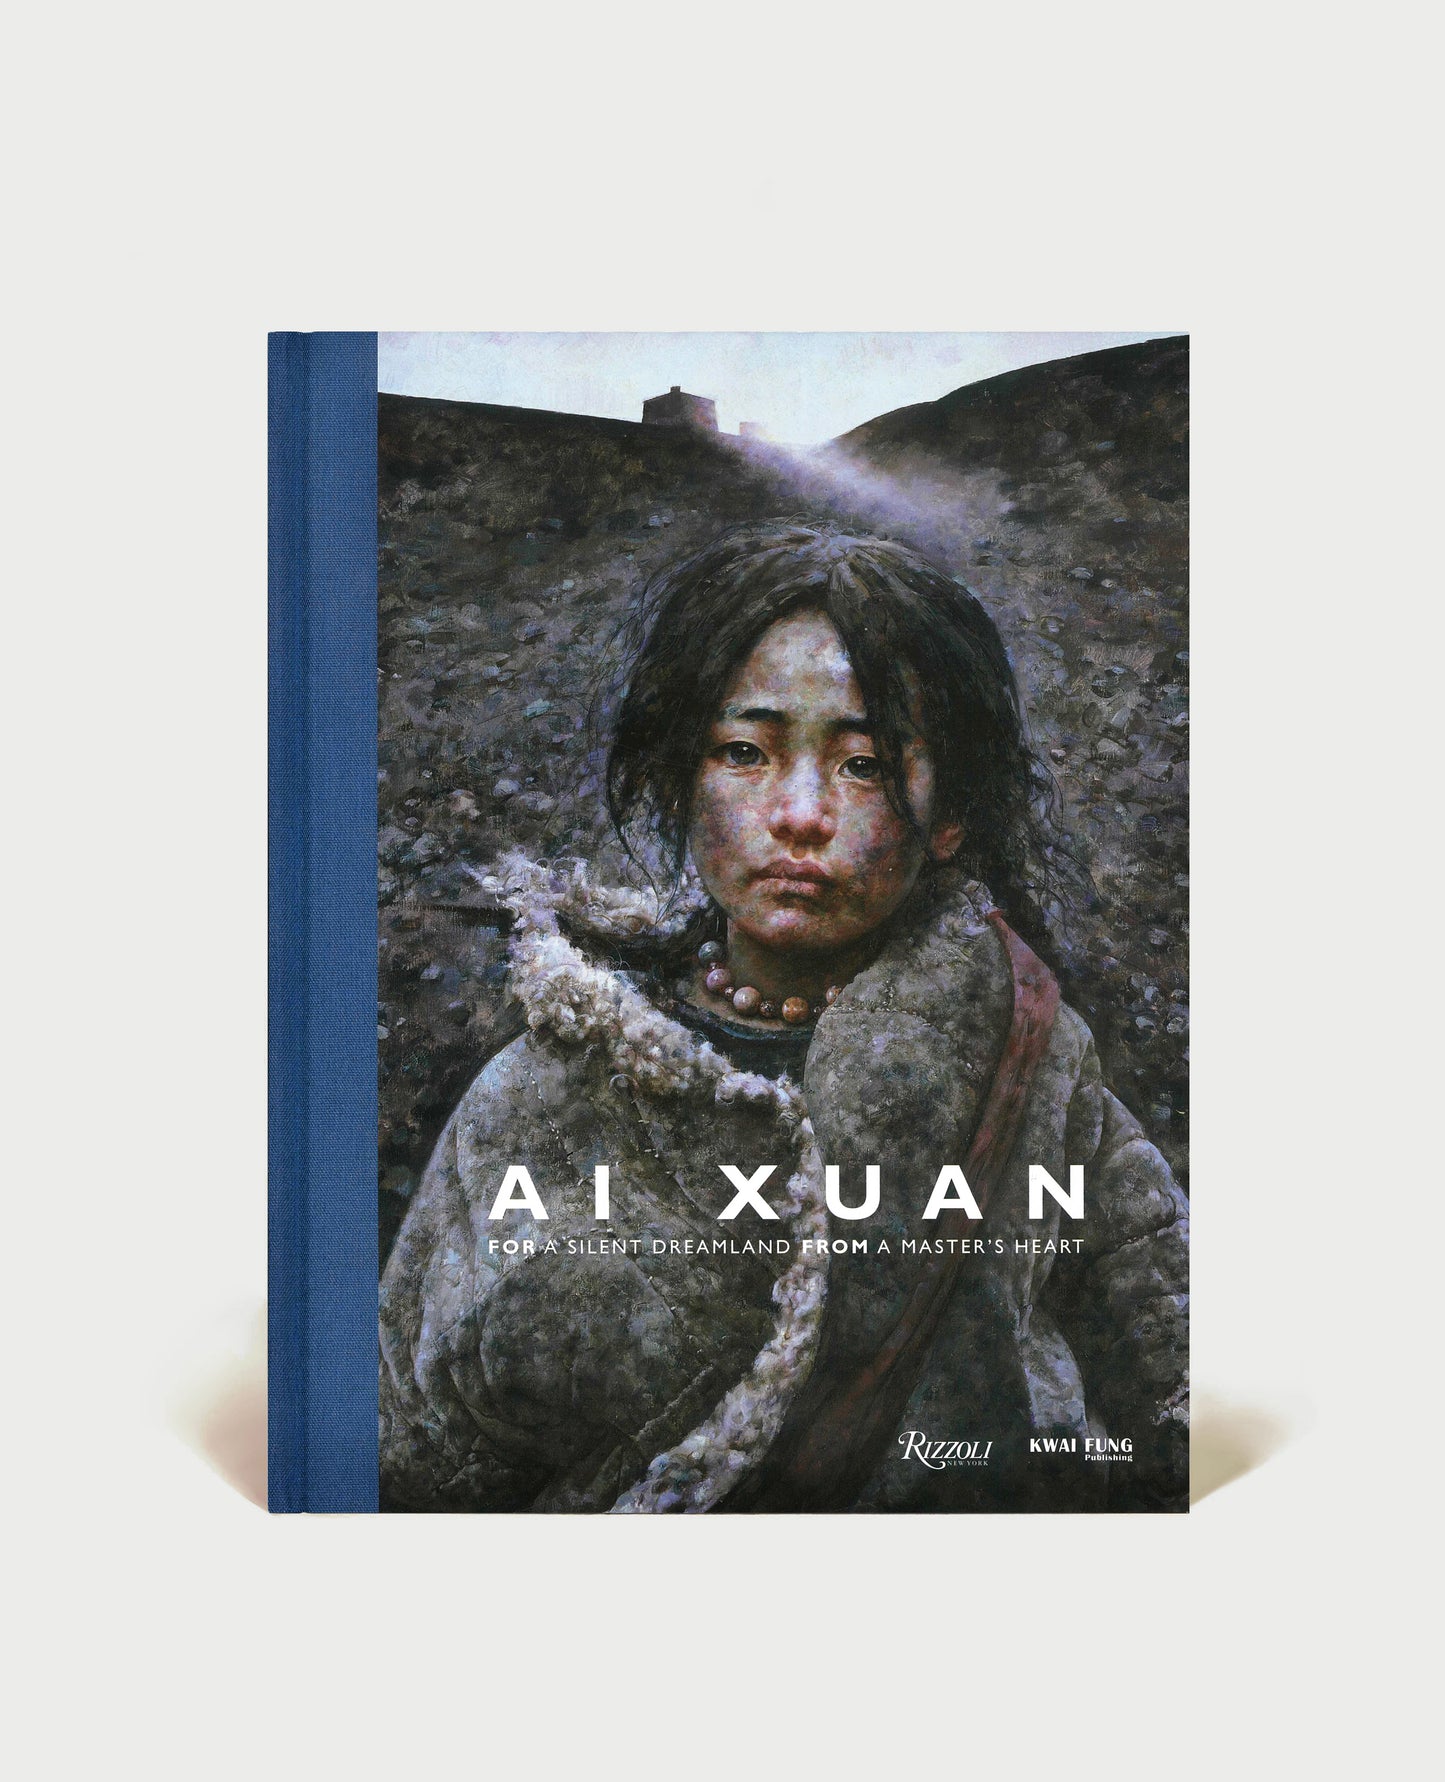 AI XUAN: FOR A SILENT DREAMLAND FROM A MASTER’S HEART